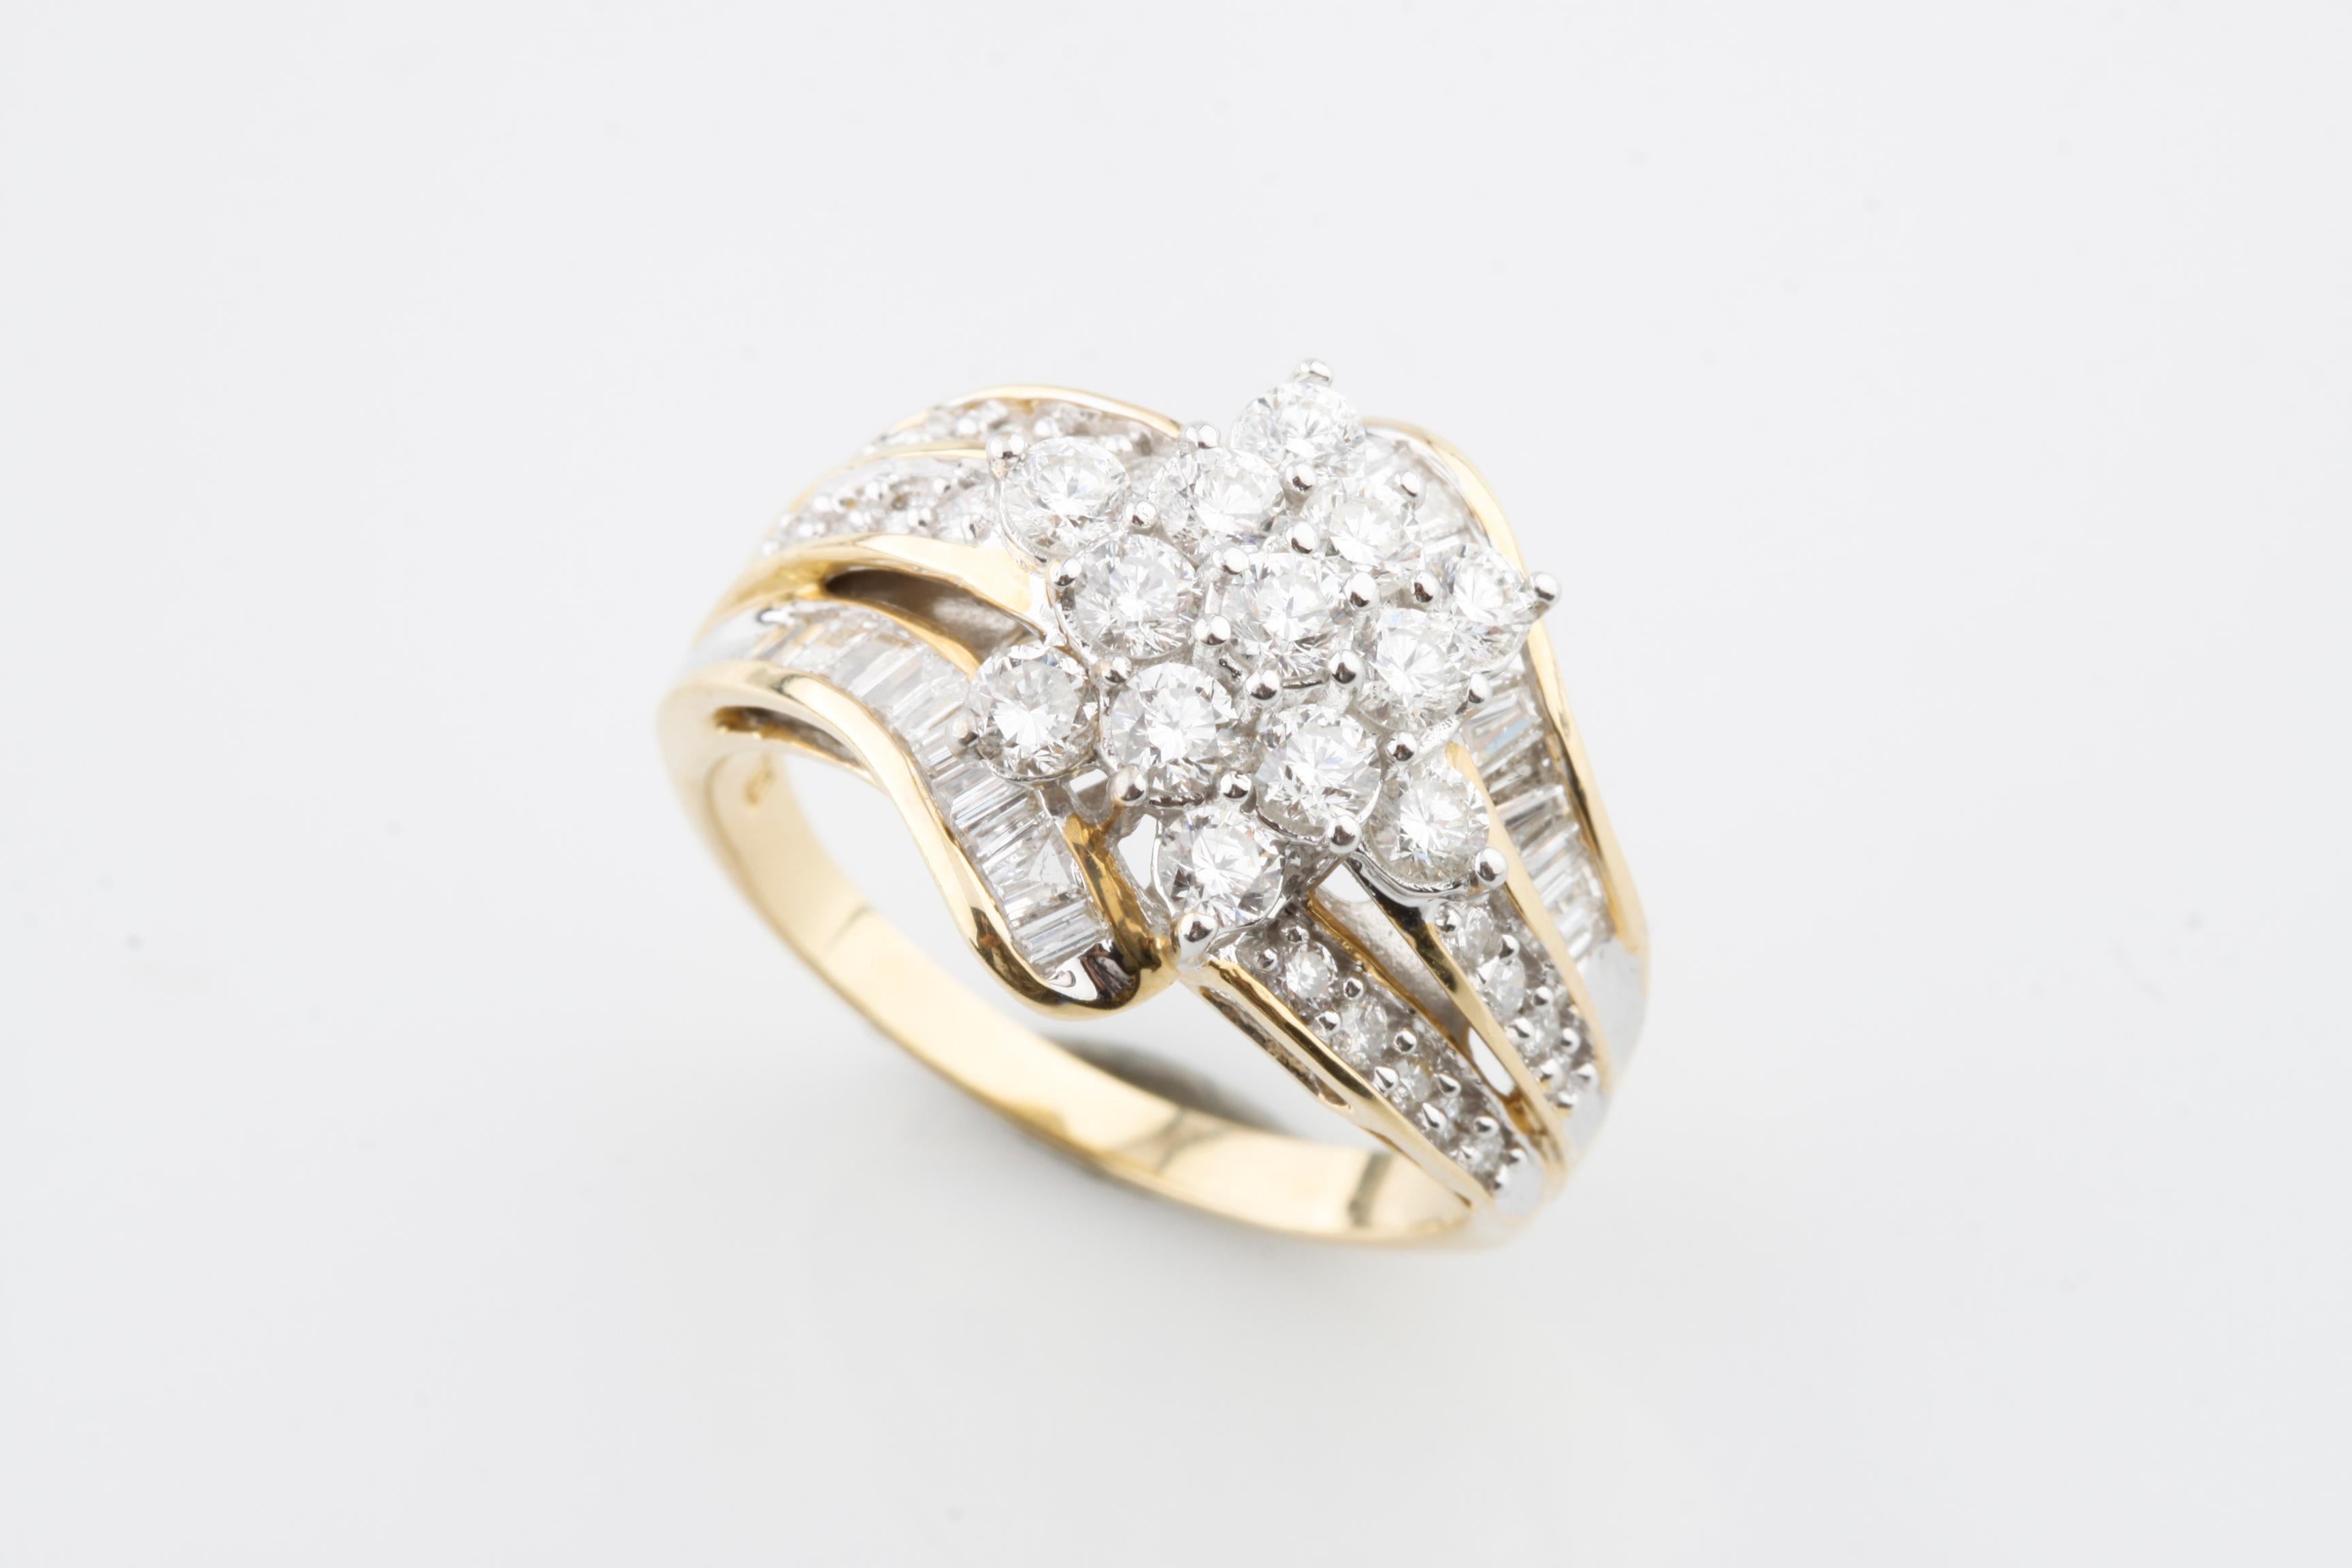 Gorgeous, Unique Cluster Ring!
Features 14k Yellow Gold Setting with White Gold Prongs and Accents
Features Prong Set Round Diamond Central 